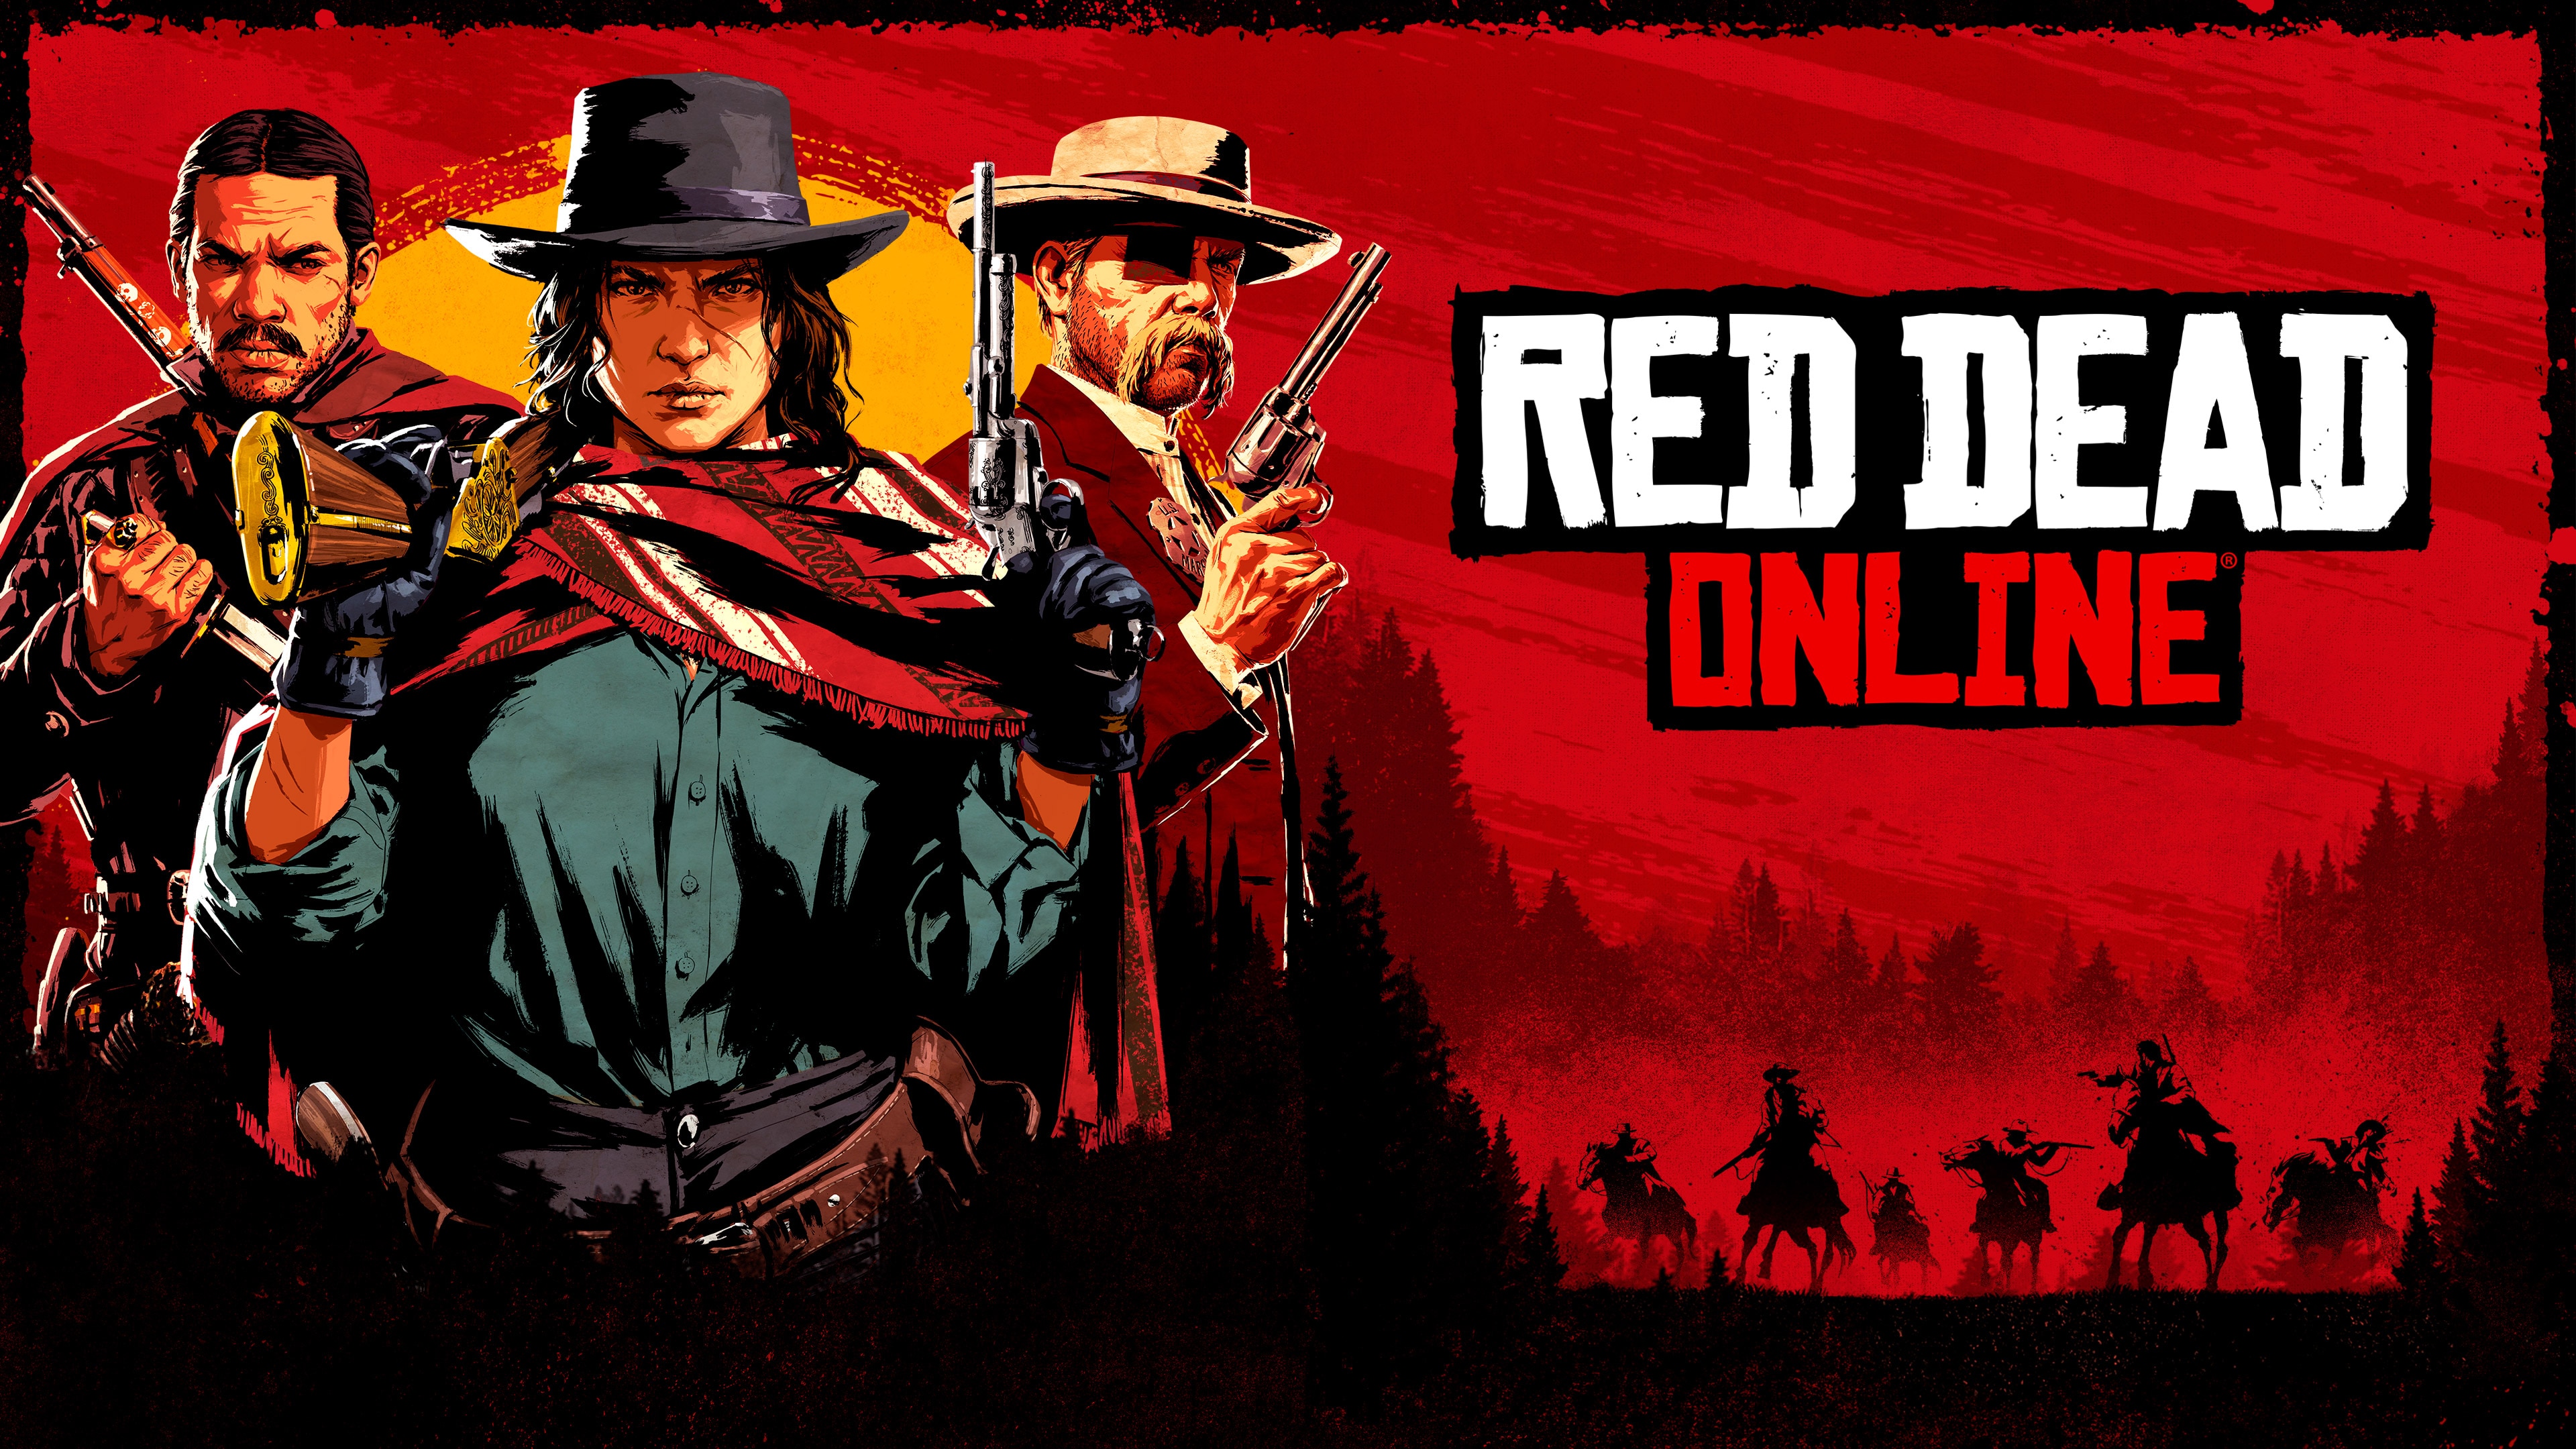 Video Game Red Dead Online HD Wallpaper | Background Image